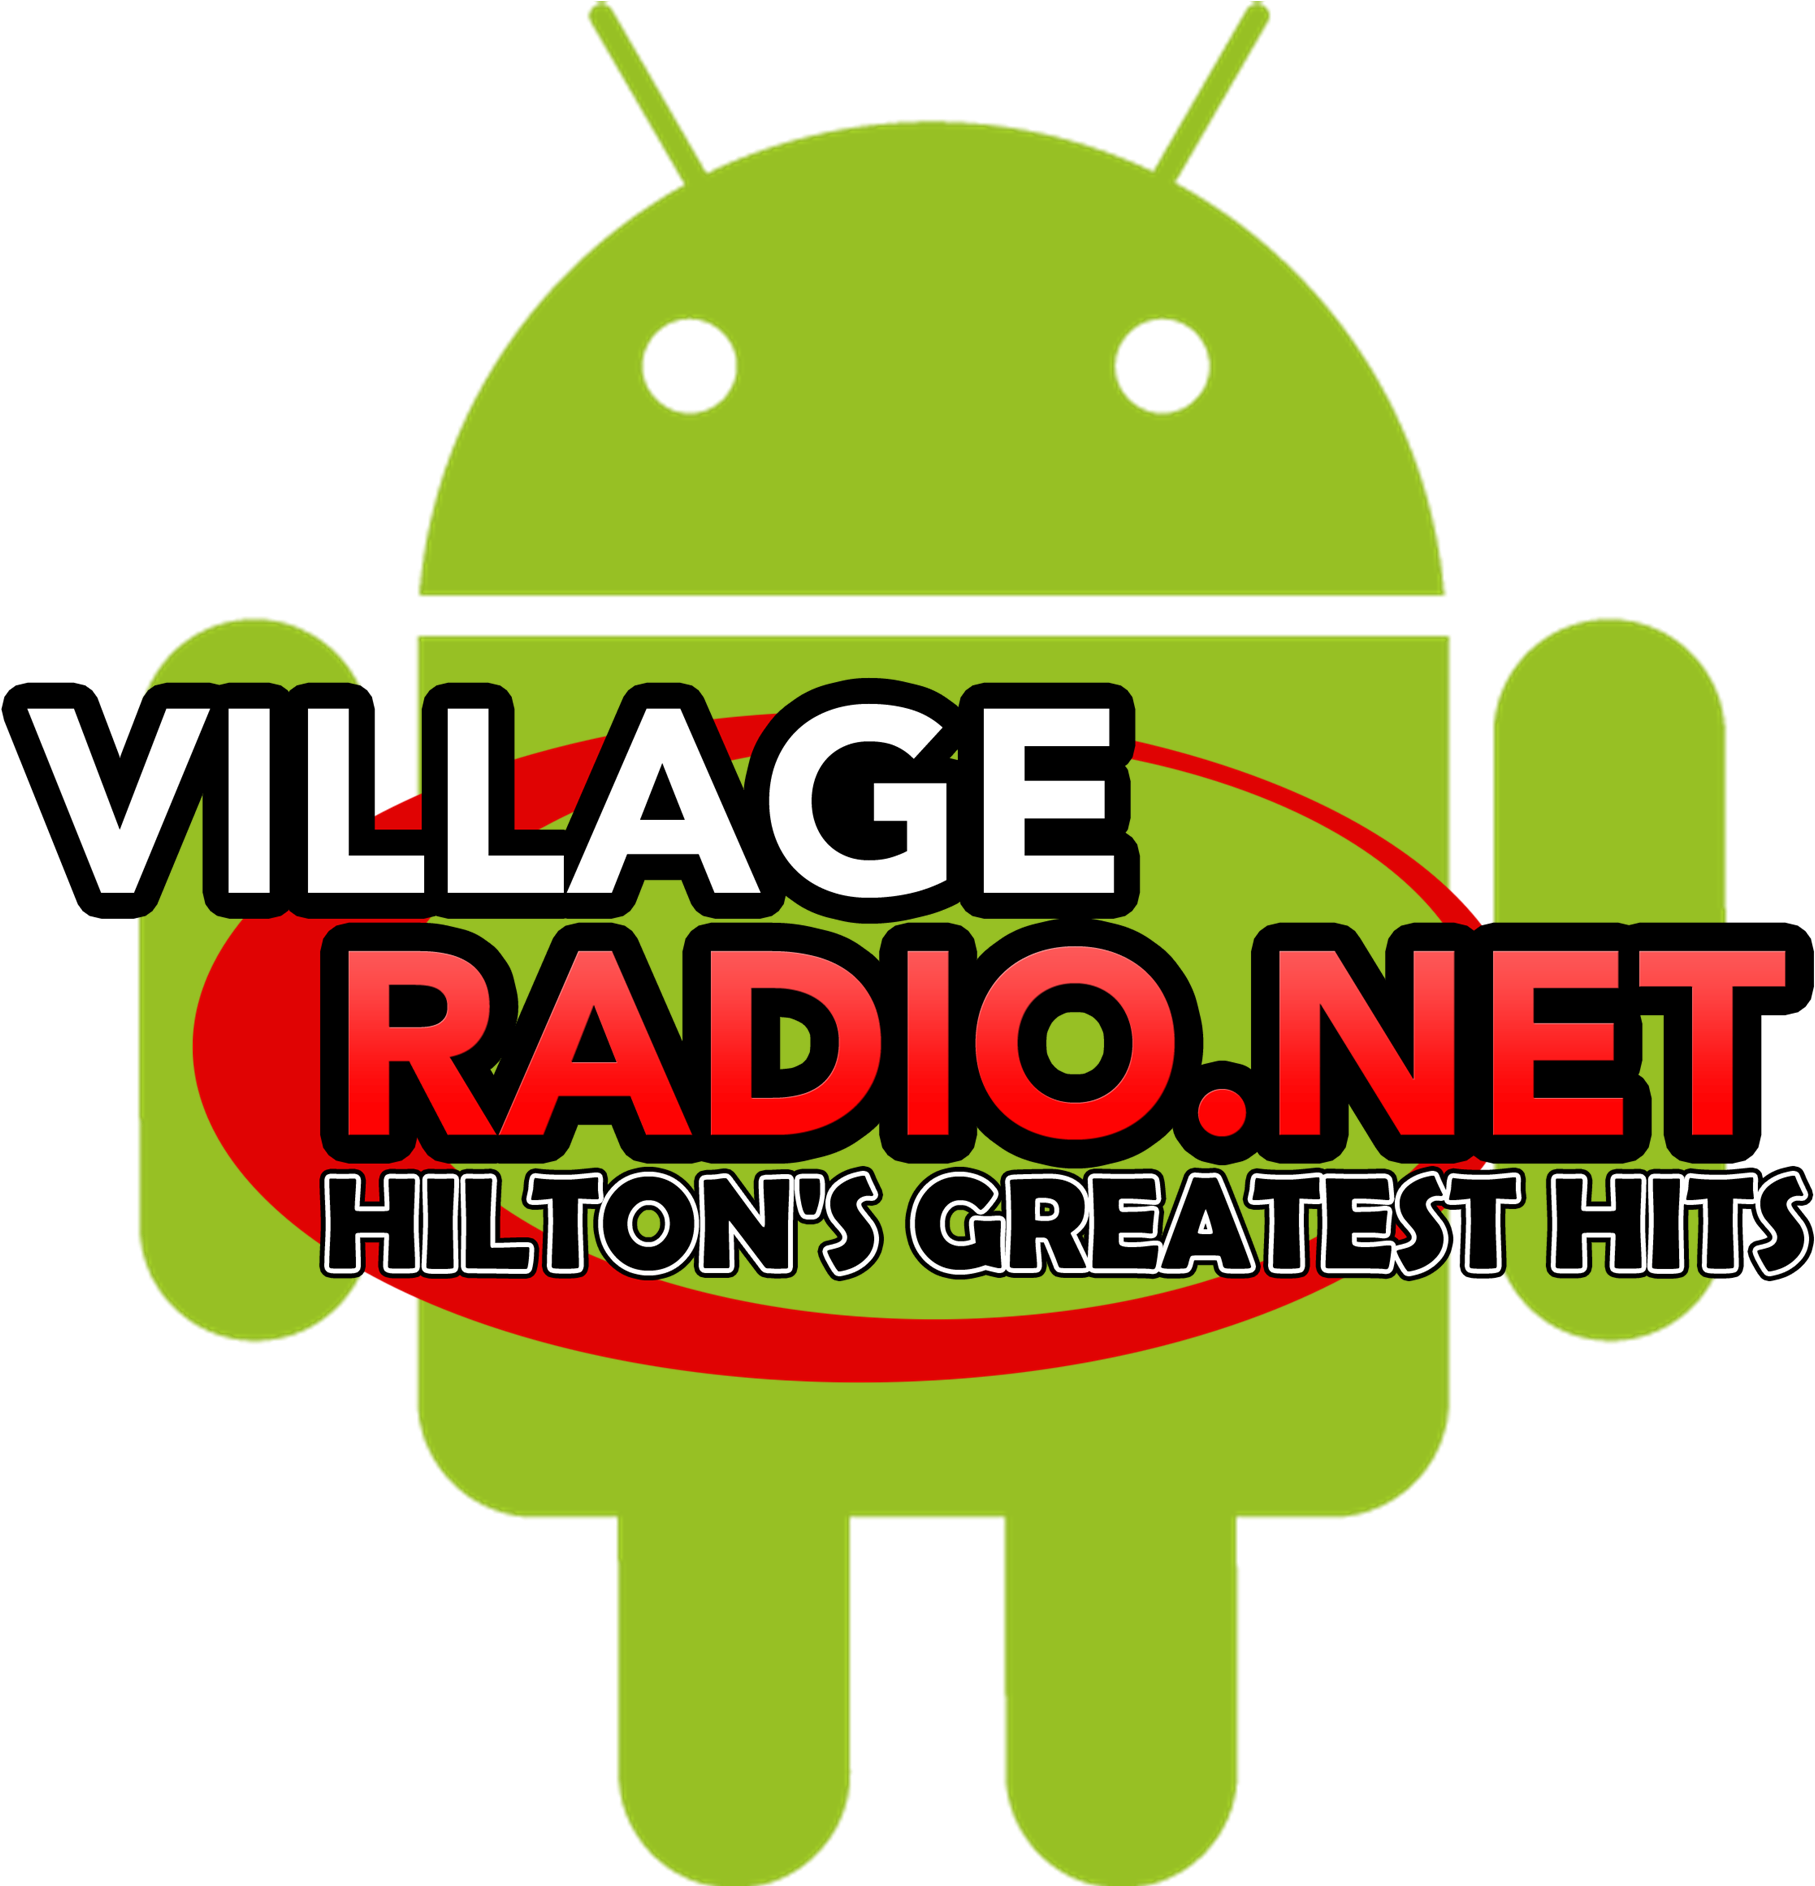 Click Below To Download Our Free Custom Apps To Listen - Android (1899x1947)